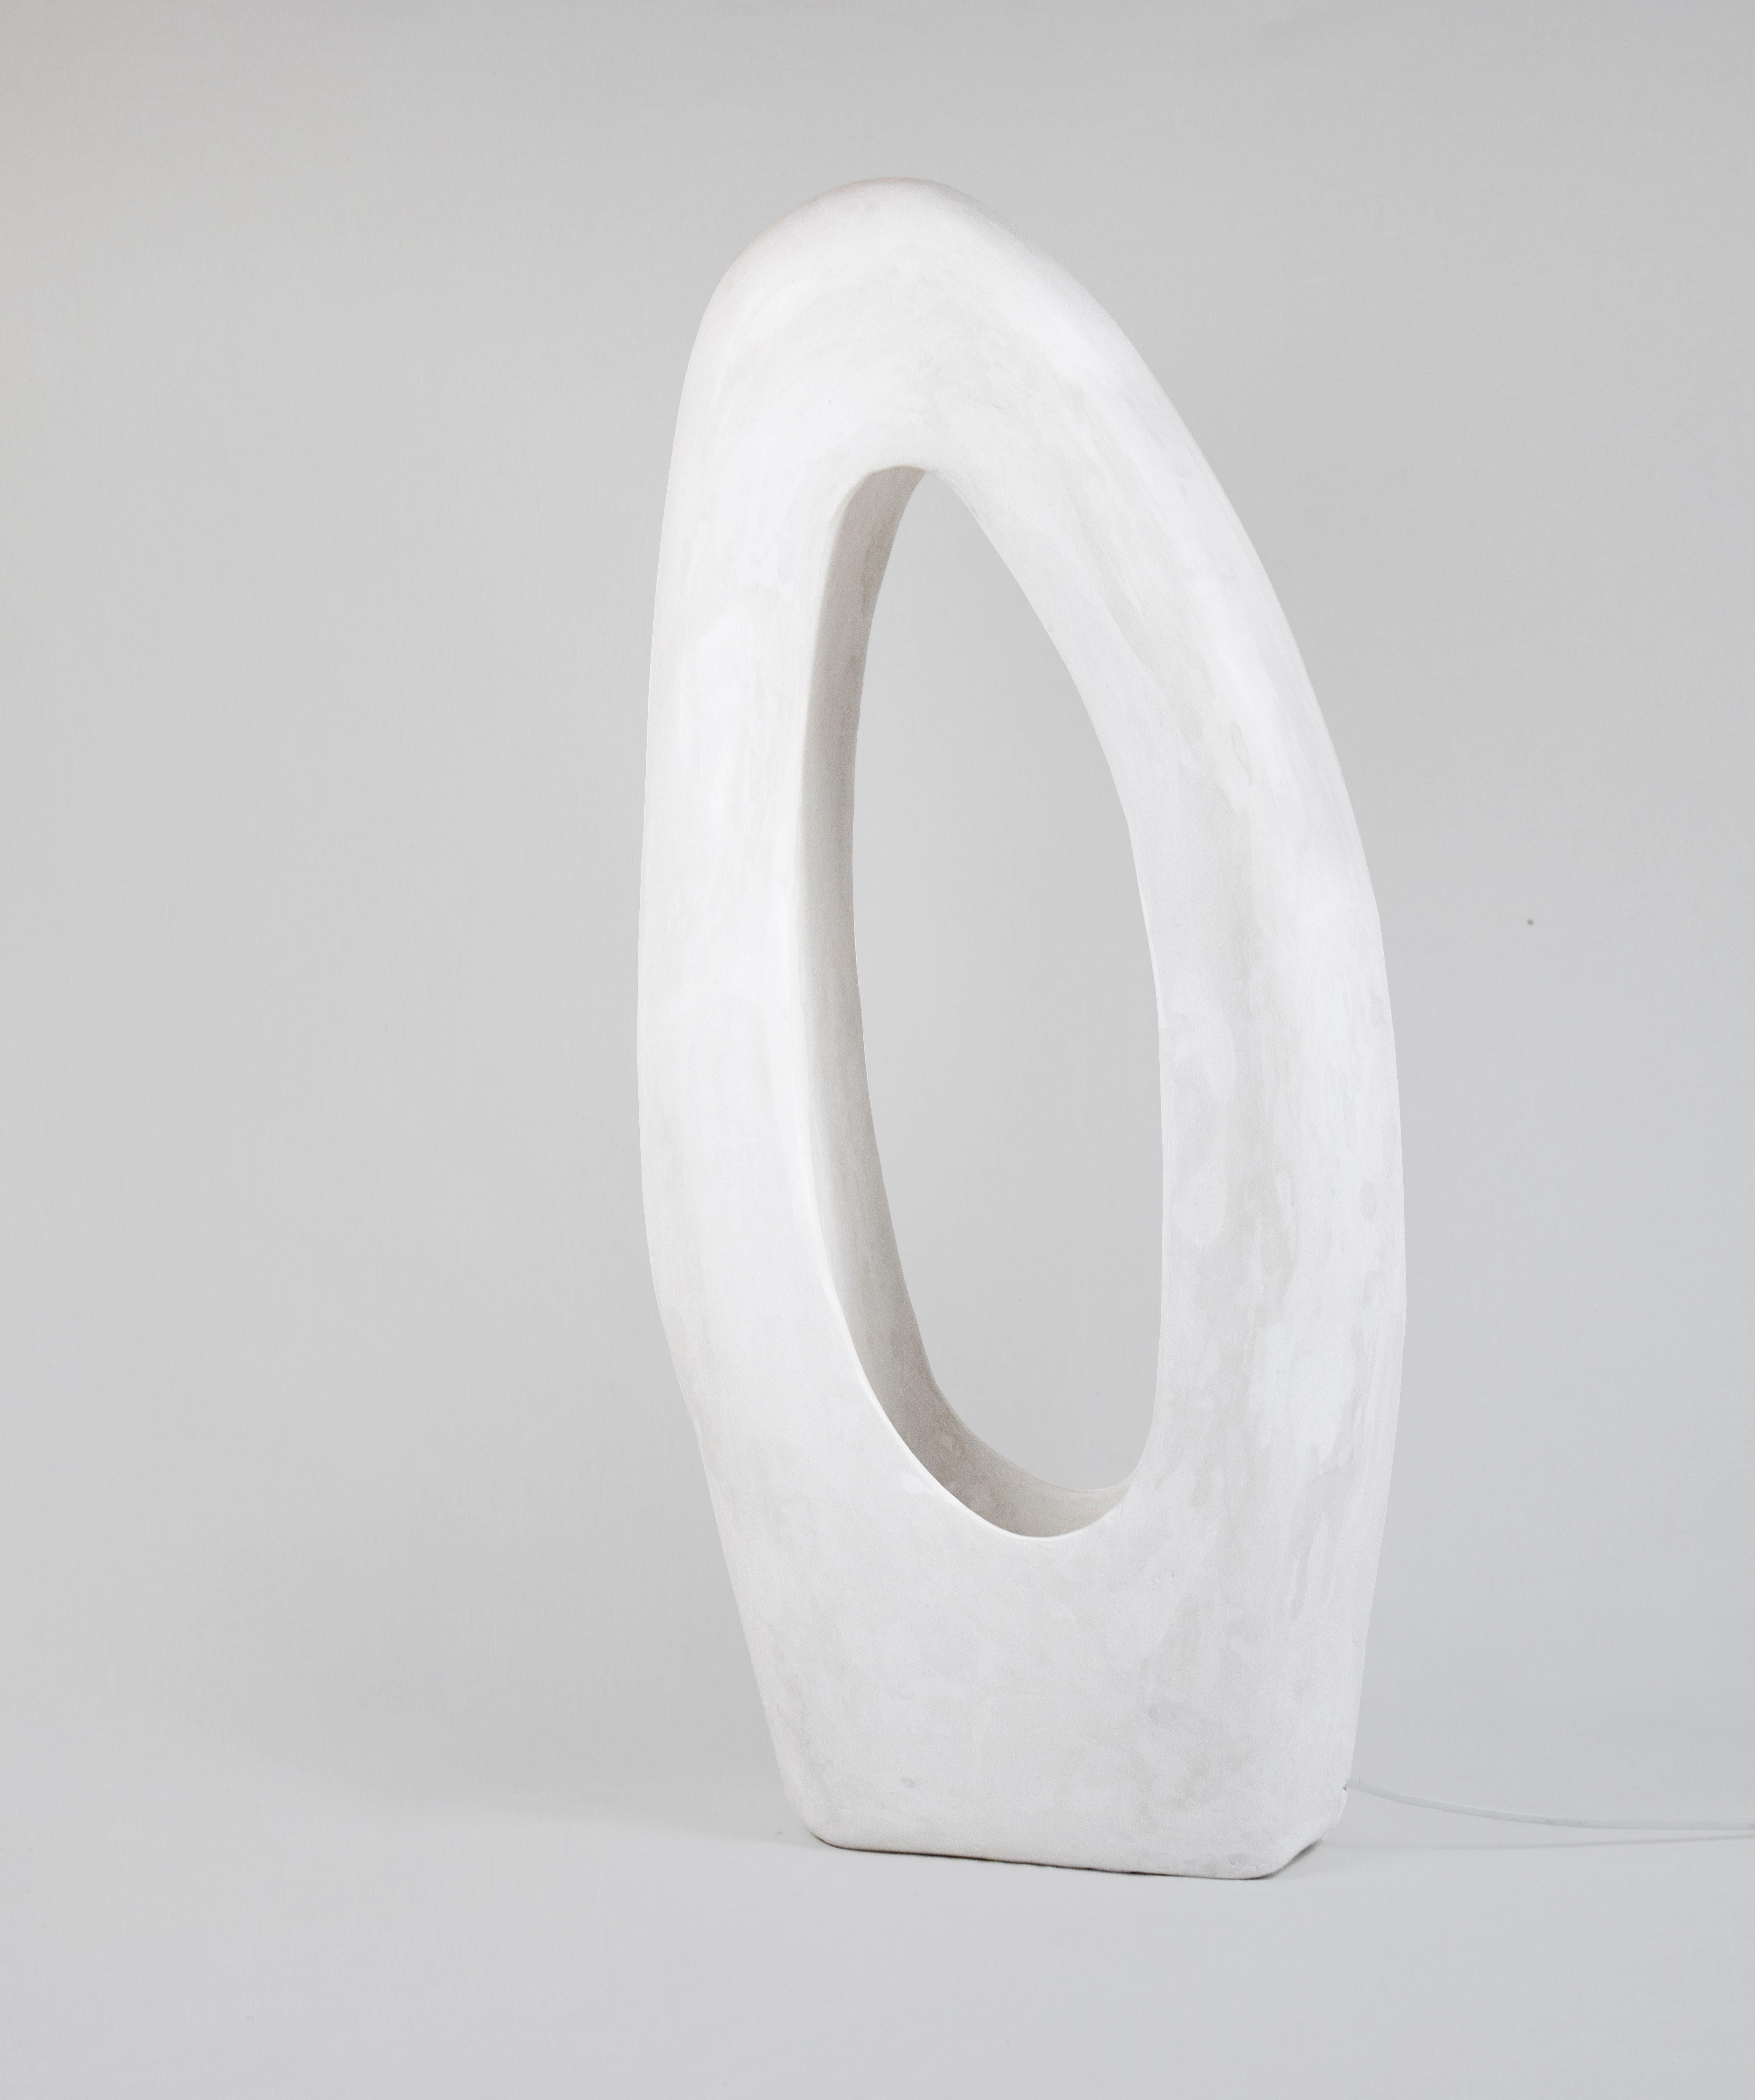 The Lacuna Lamp is a contemporary handmade sculptural gypsum lamp part of the Living Forms collection. The lamp is cast in gypsum and carved by hand. The Longing Lamp stands out as a stunning blend of fine art and functional design. It's a part of